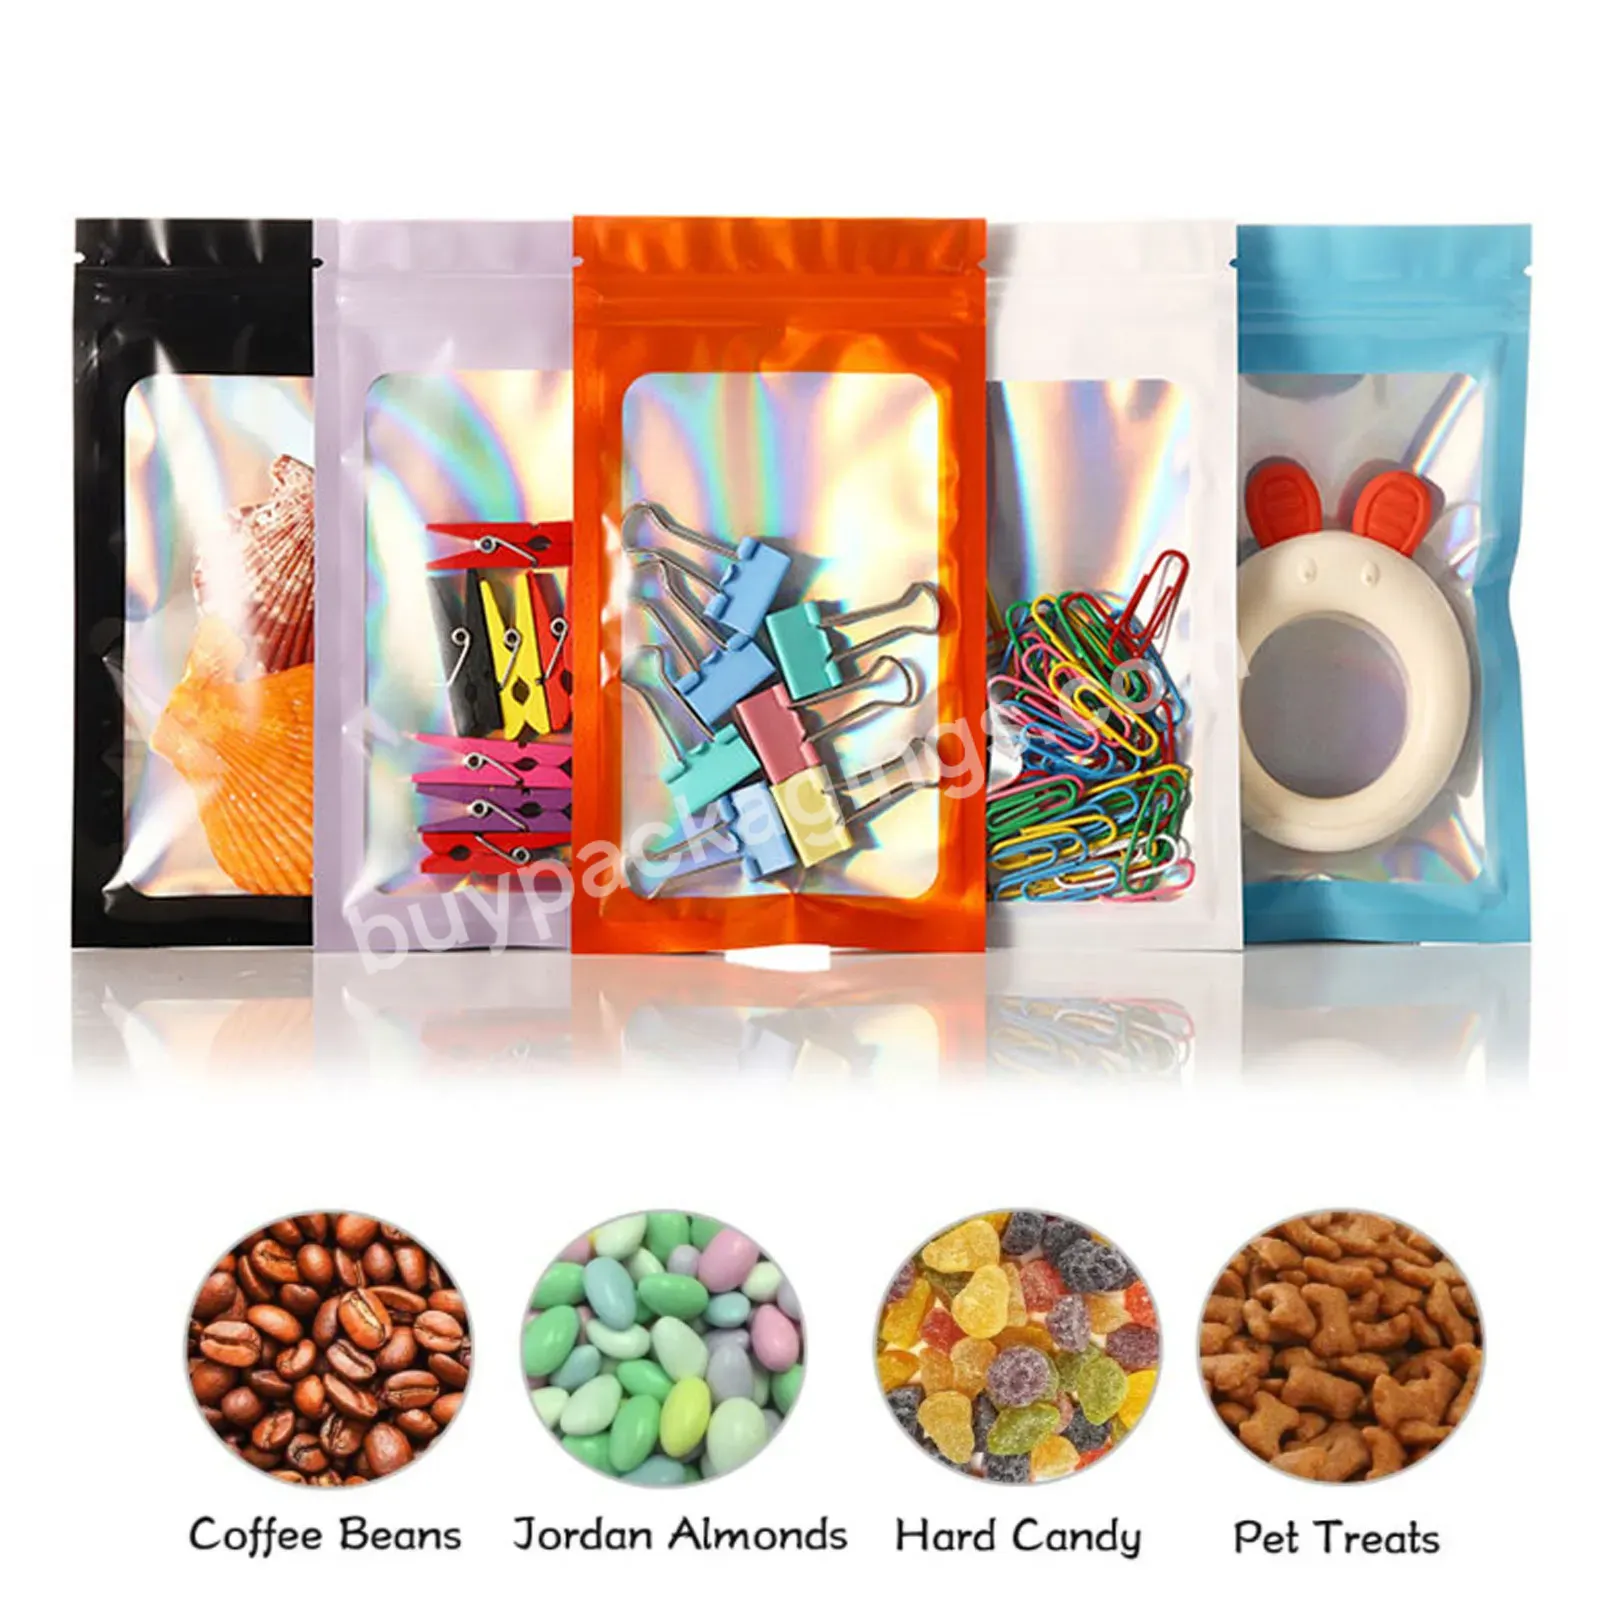 Rts Resealable Bags With Clear Window Metallic Holographic Mylar Transparent Holographic Bags